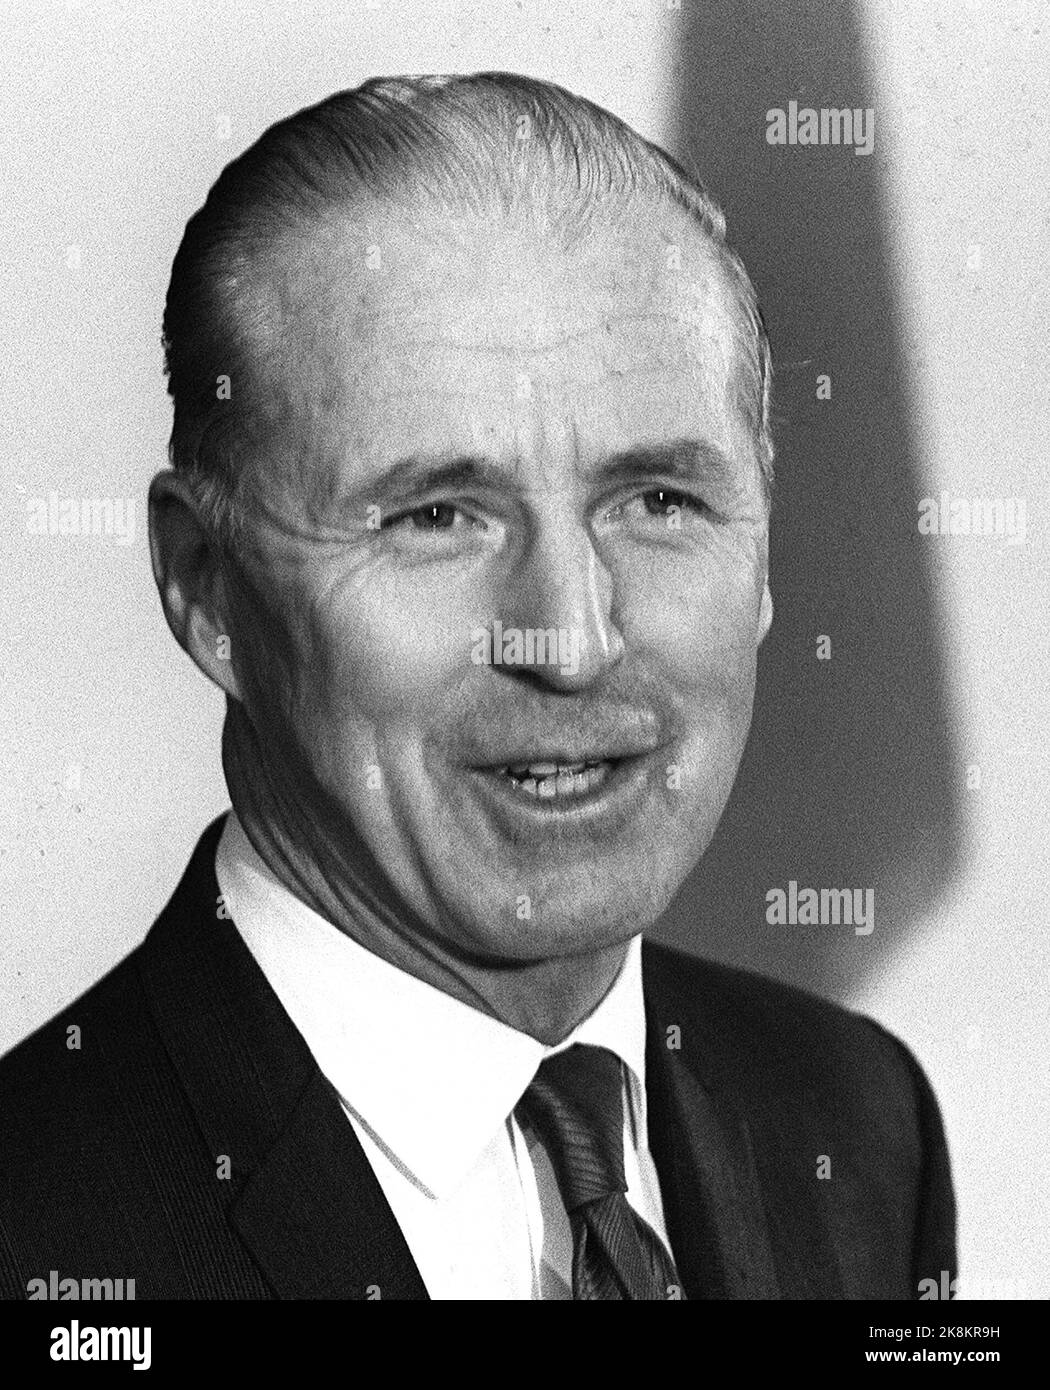 Oslo 19701209 The Peace Prize. The Nobel Peace Prize for 1970 to Dr. Norman Ernest Borlaug. Borlaug received the award for his work at the international center for processing corn and wheat in Mexico. Here from the press conference the day before the awards ceremony. Photo NTB / NTB / Jan Dahl Stock Photo